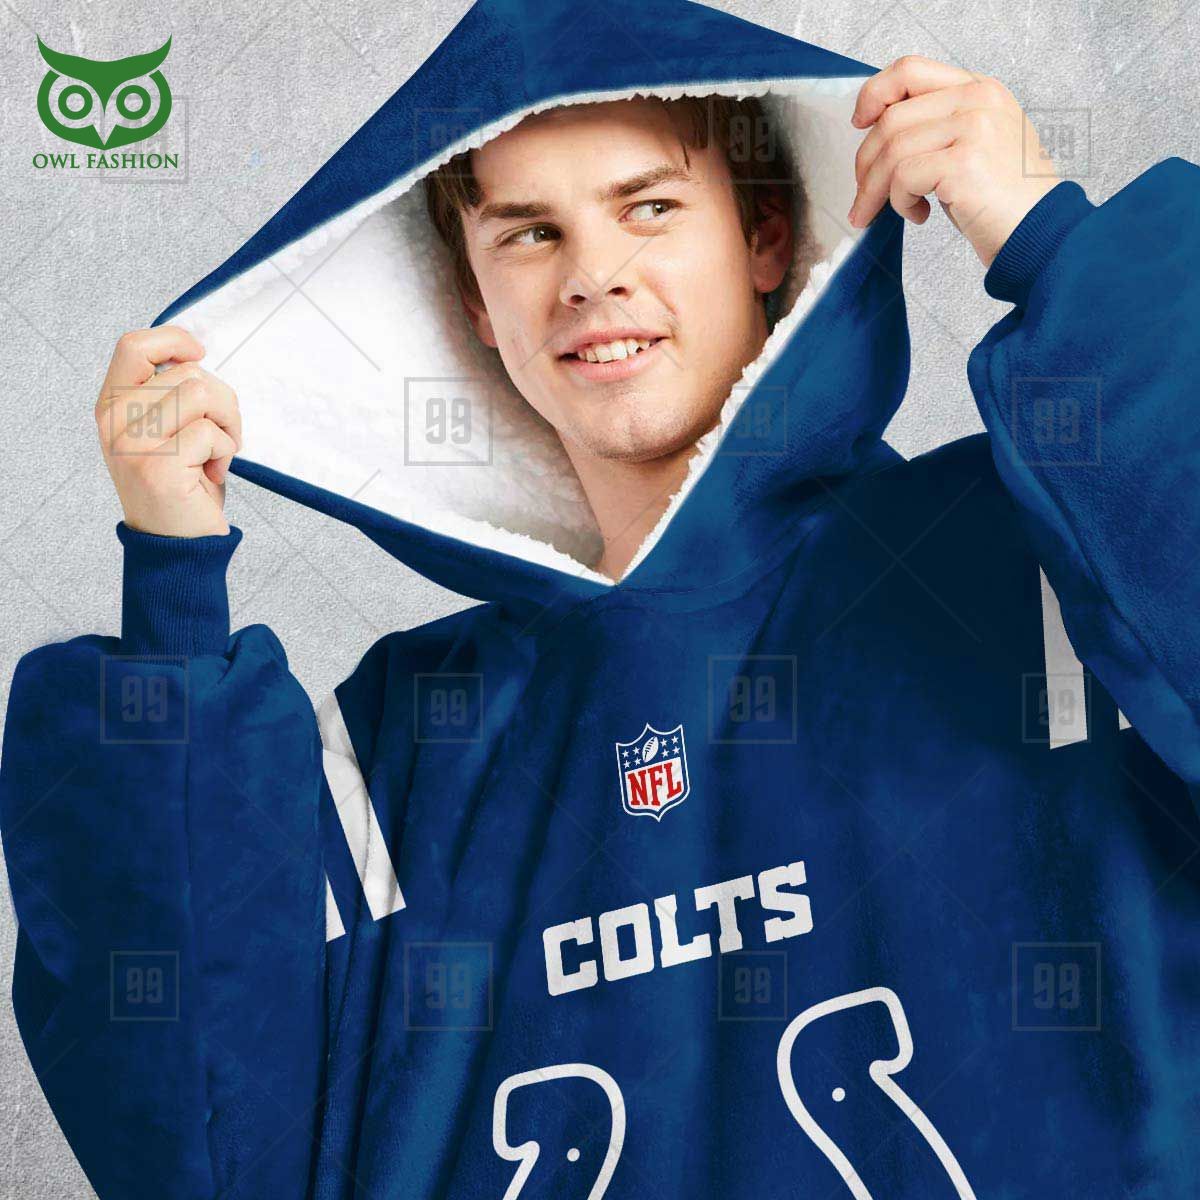 indianapolis colts american league nfl customized snuggie hoodie 2 qoy3o